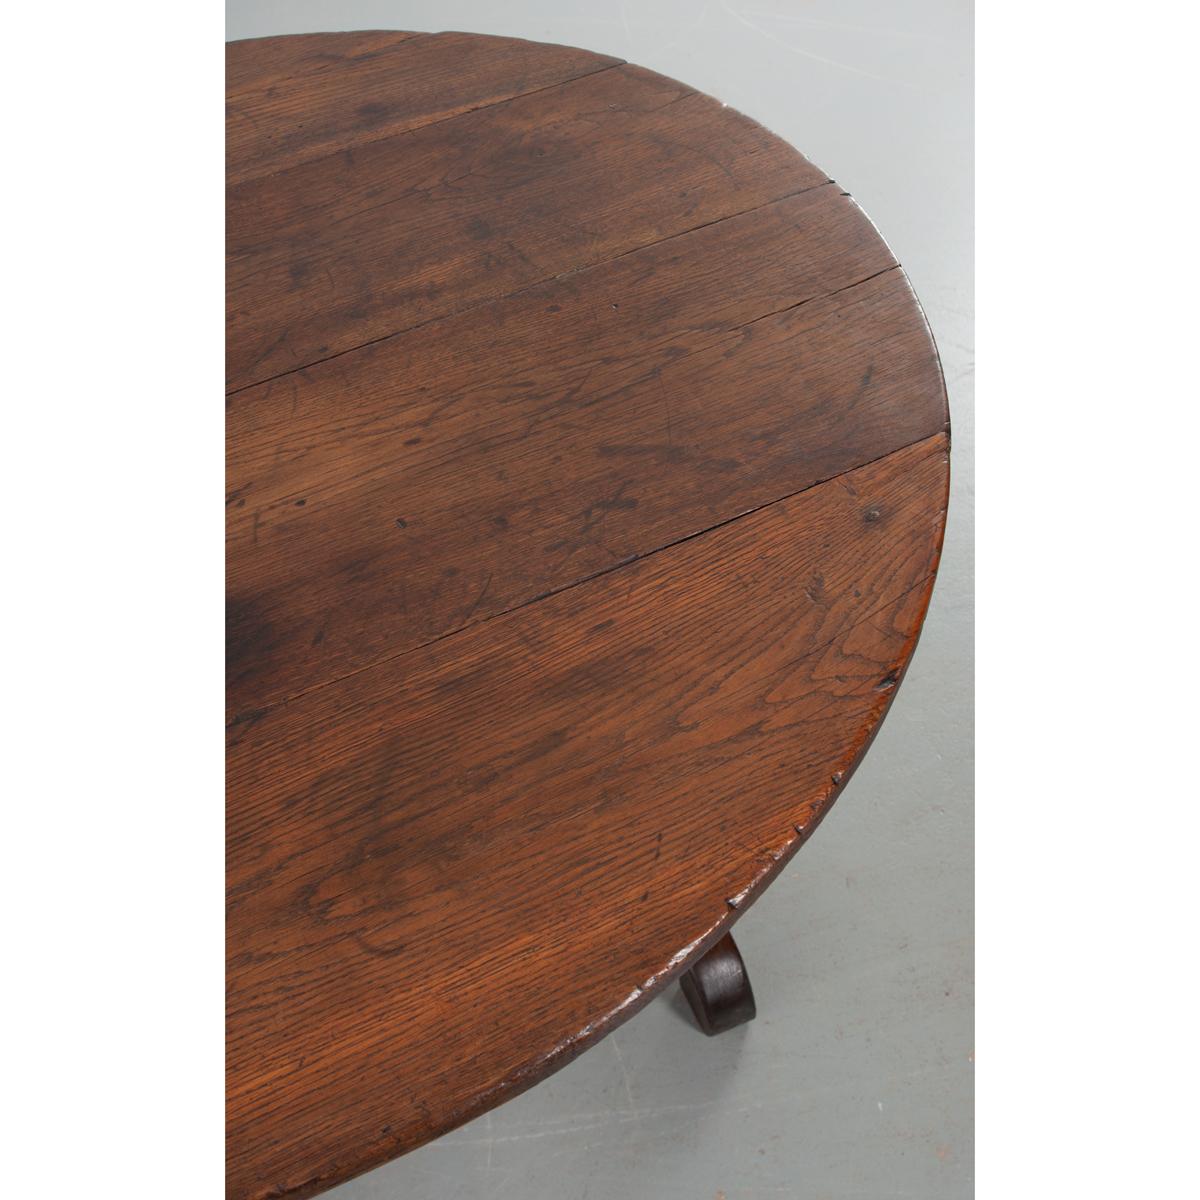 This wine tasting – or vendange – table was made in the 19th century in France. Used by wine-makers throughout France and Europe, these specialized tables feature the ability to be stored away when not in use thanks to the tilting mechanism that